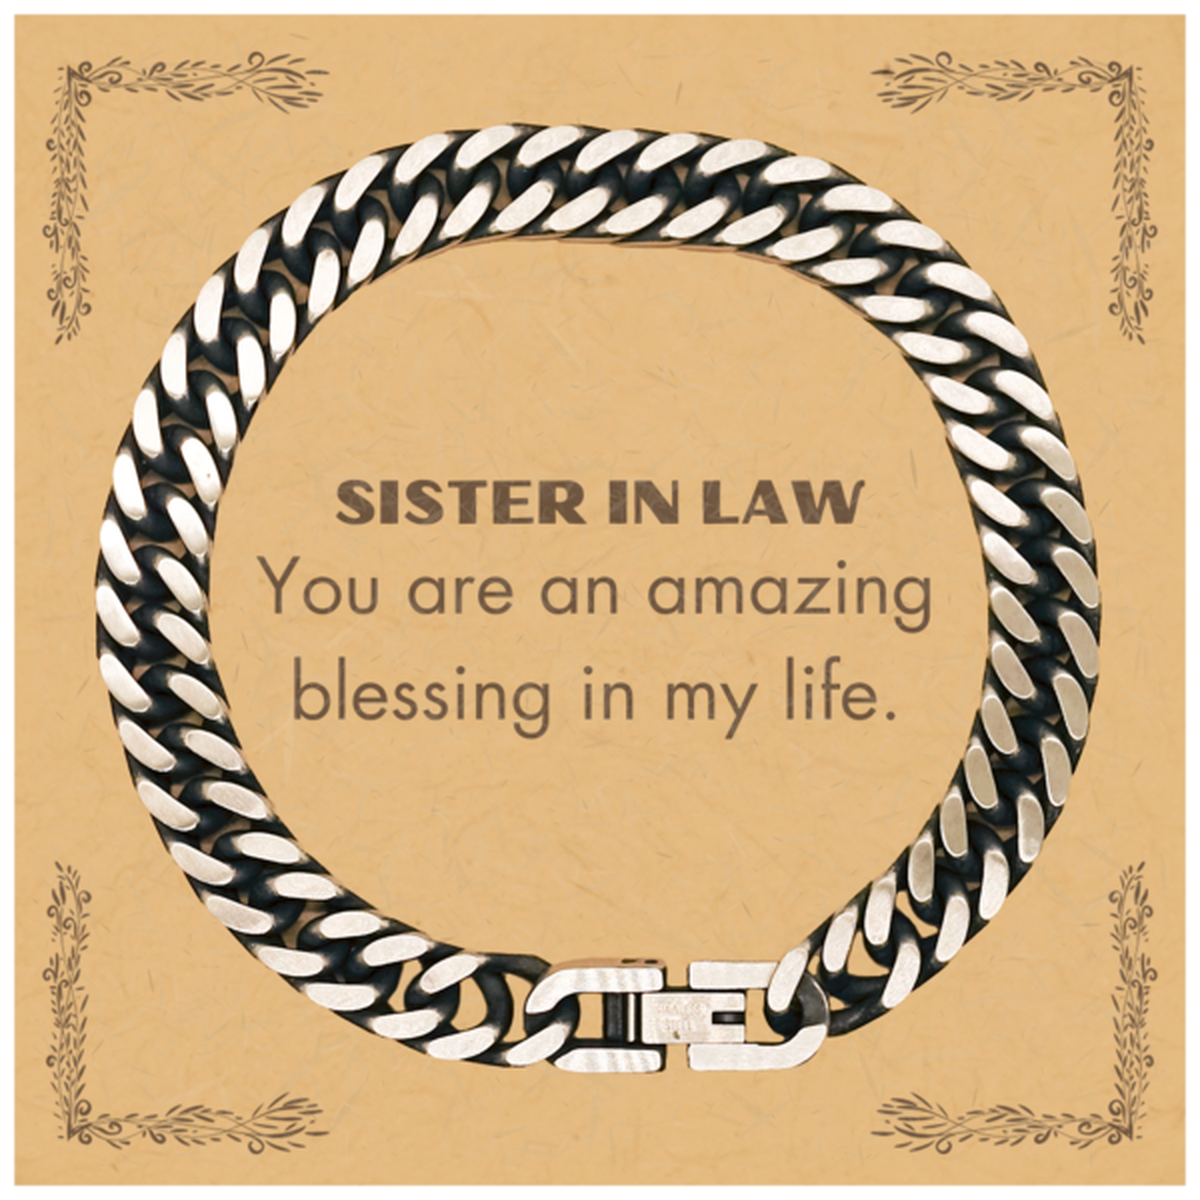 Sister In Law Cuban Link Chain Bracelet, You are an amazing blessing in my life, Thank You Gifts For Sister In Law, Inspirational Birthday Christmas Unique Gifts For Sister In Law